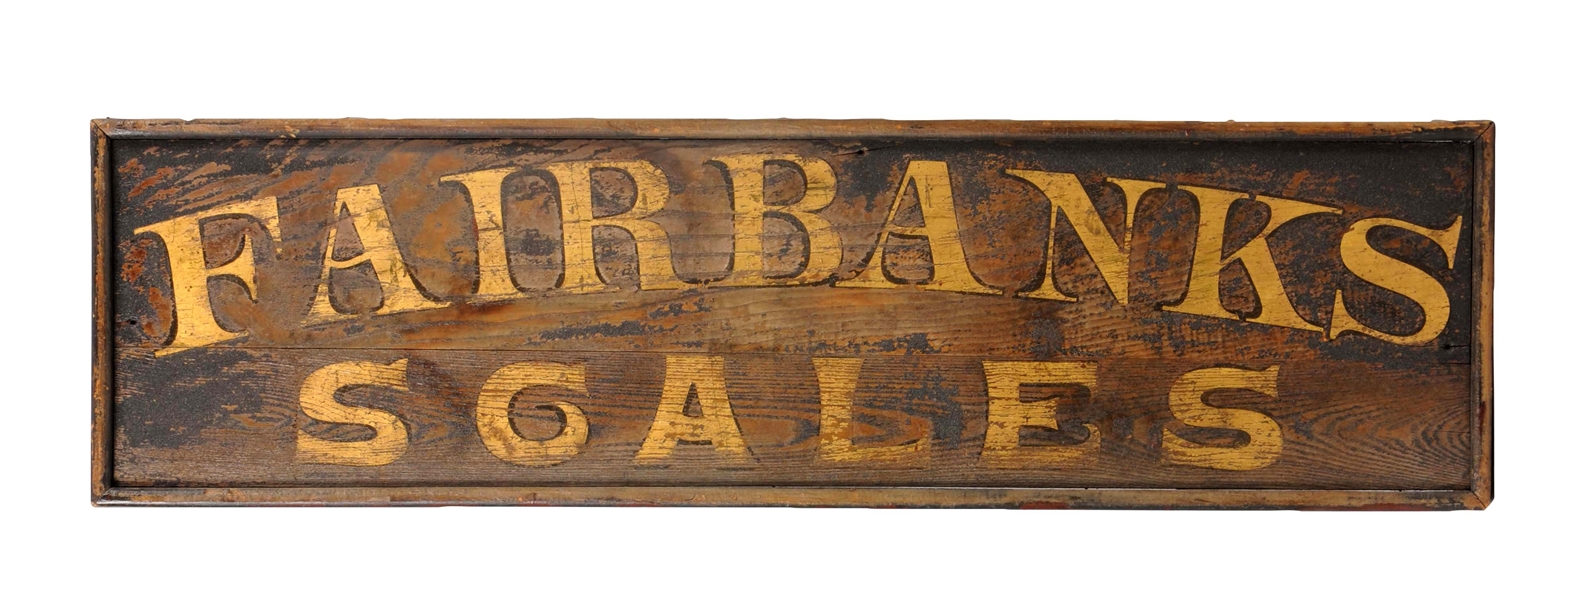 FAIRBANKS SCALES WOODEN ADVERTISING TRADE SIGN.